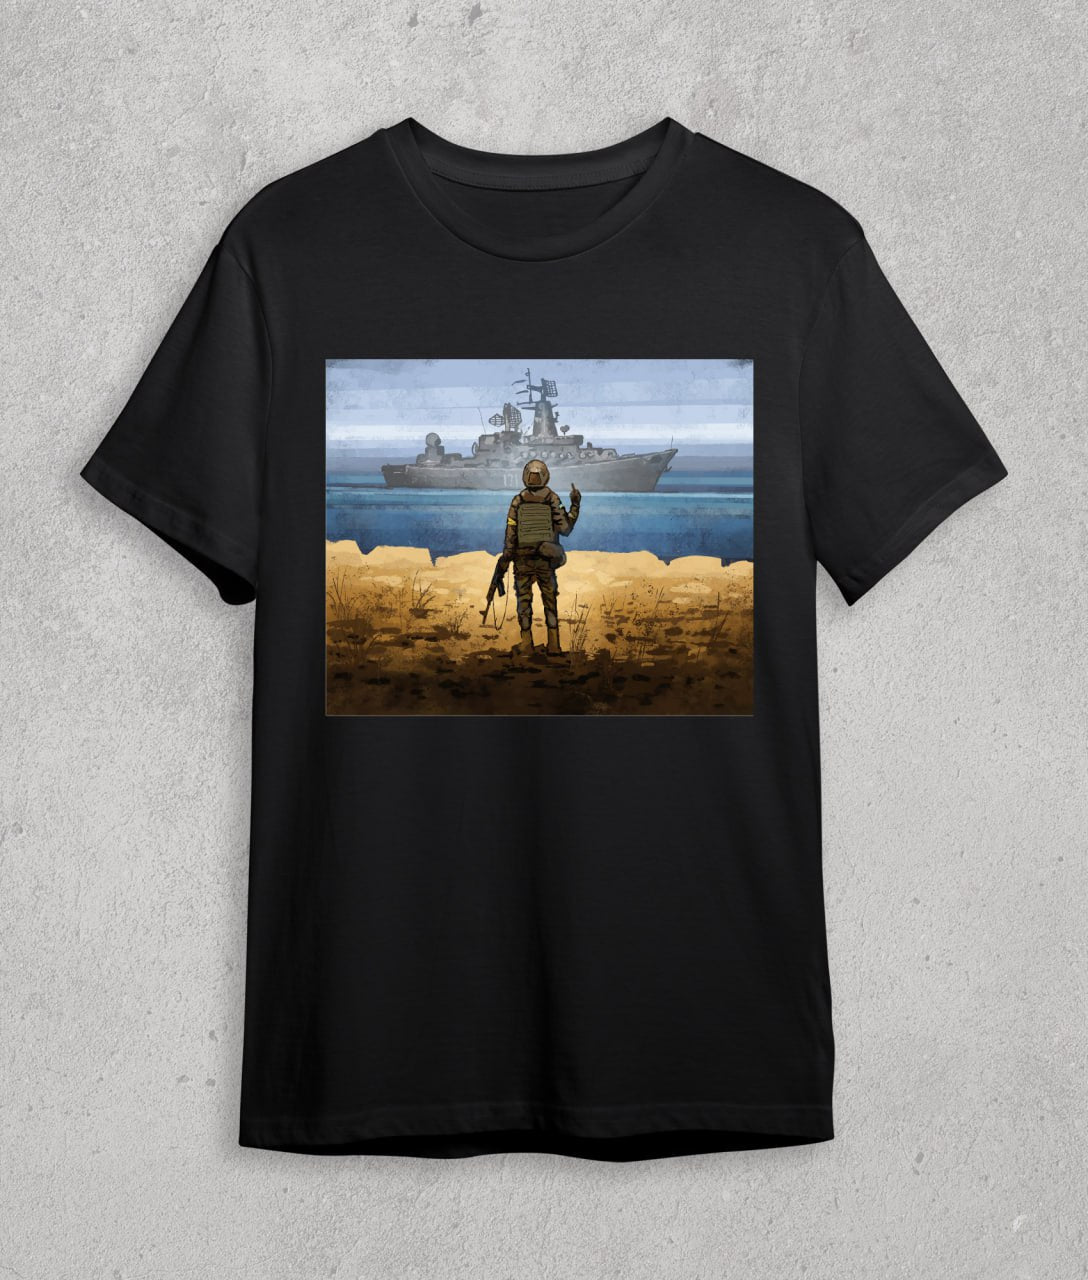 T-shirt with russian warship